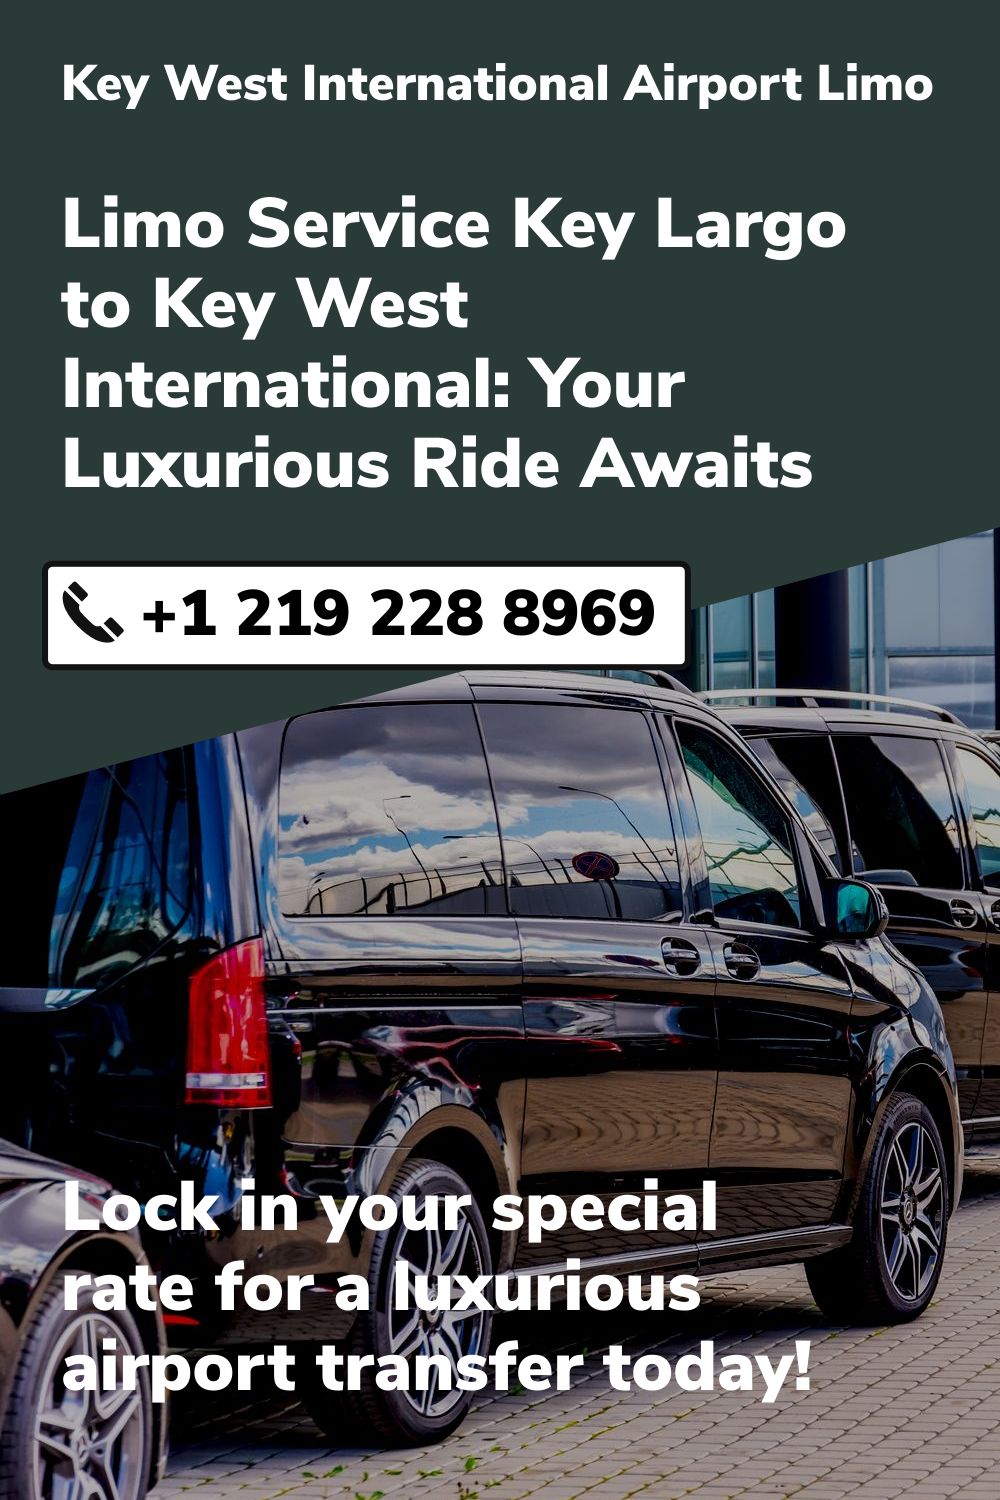 Key West International Airport Limo